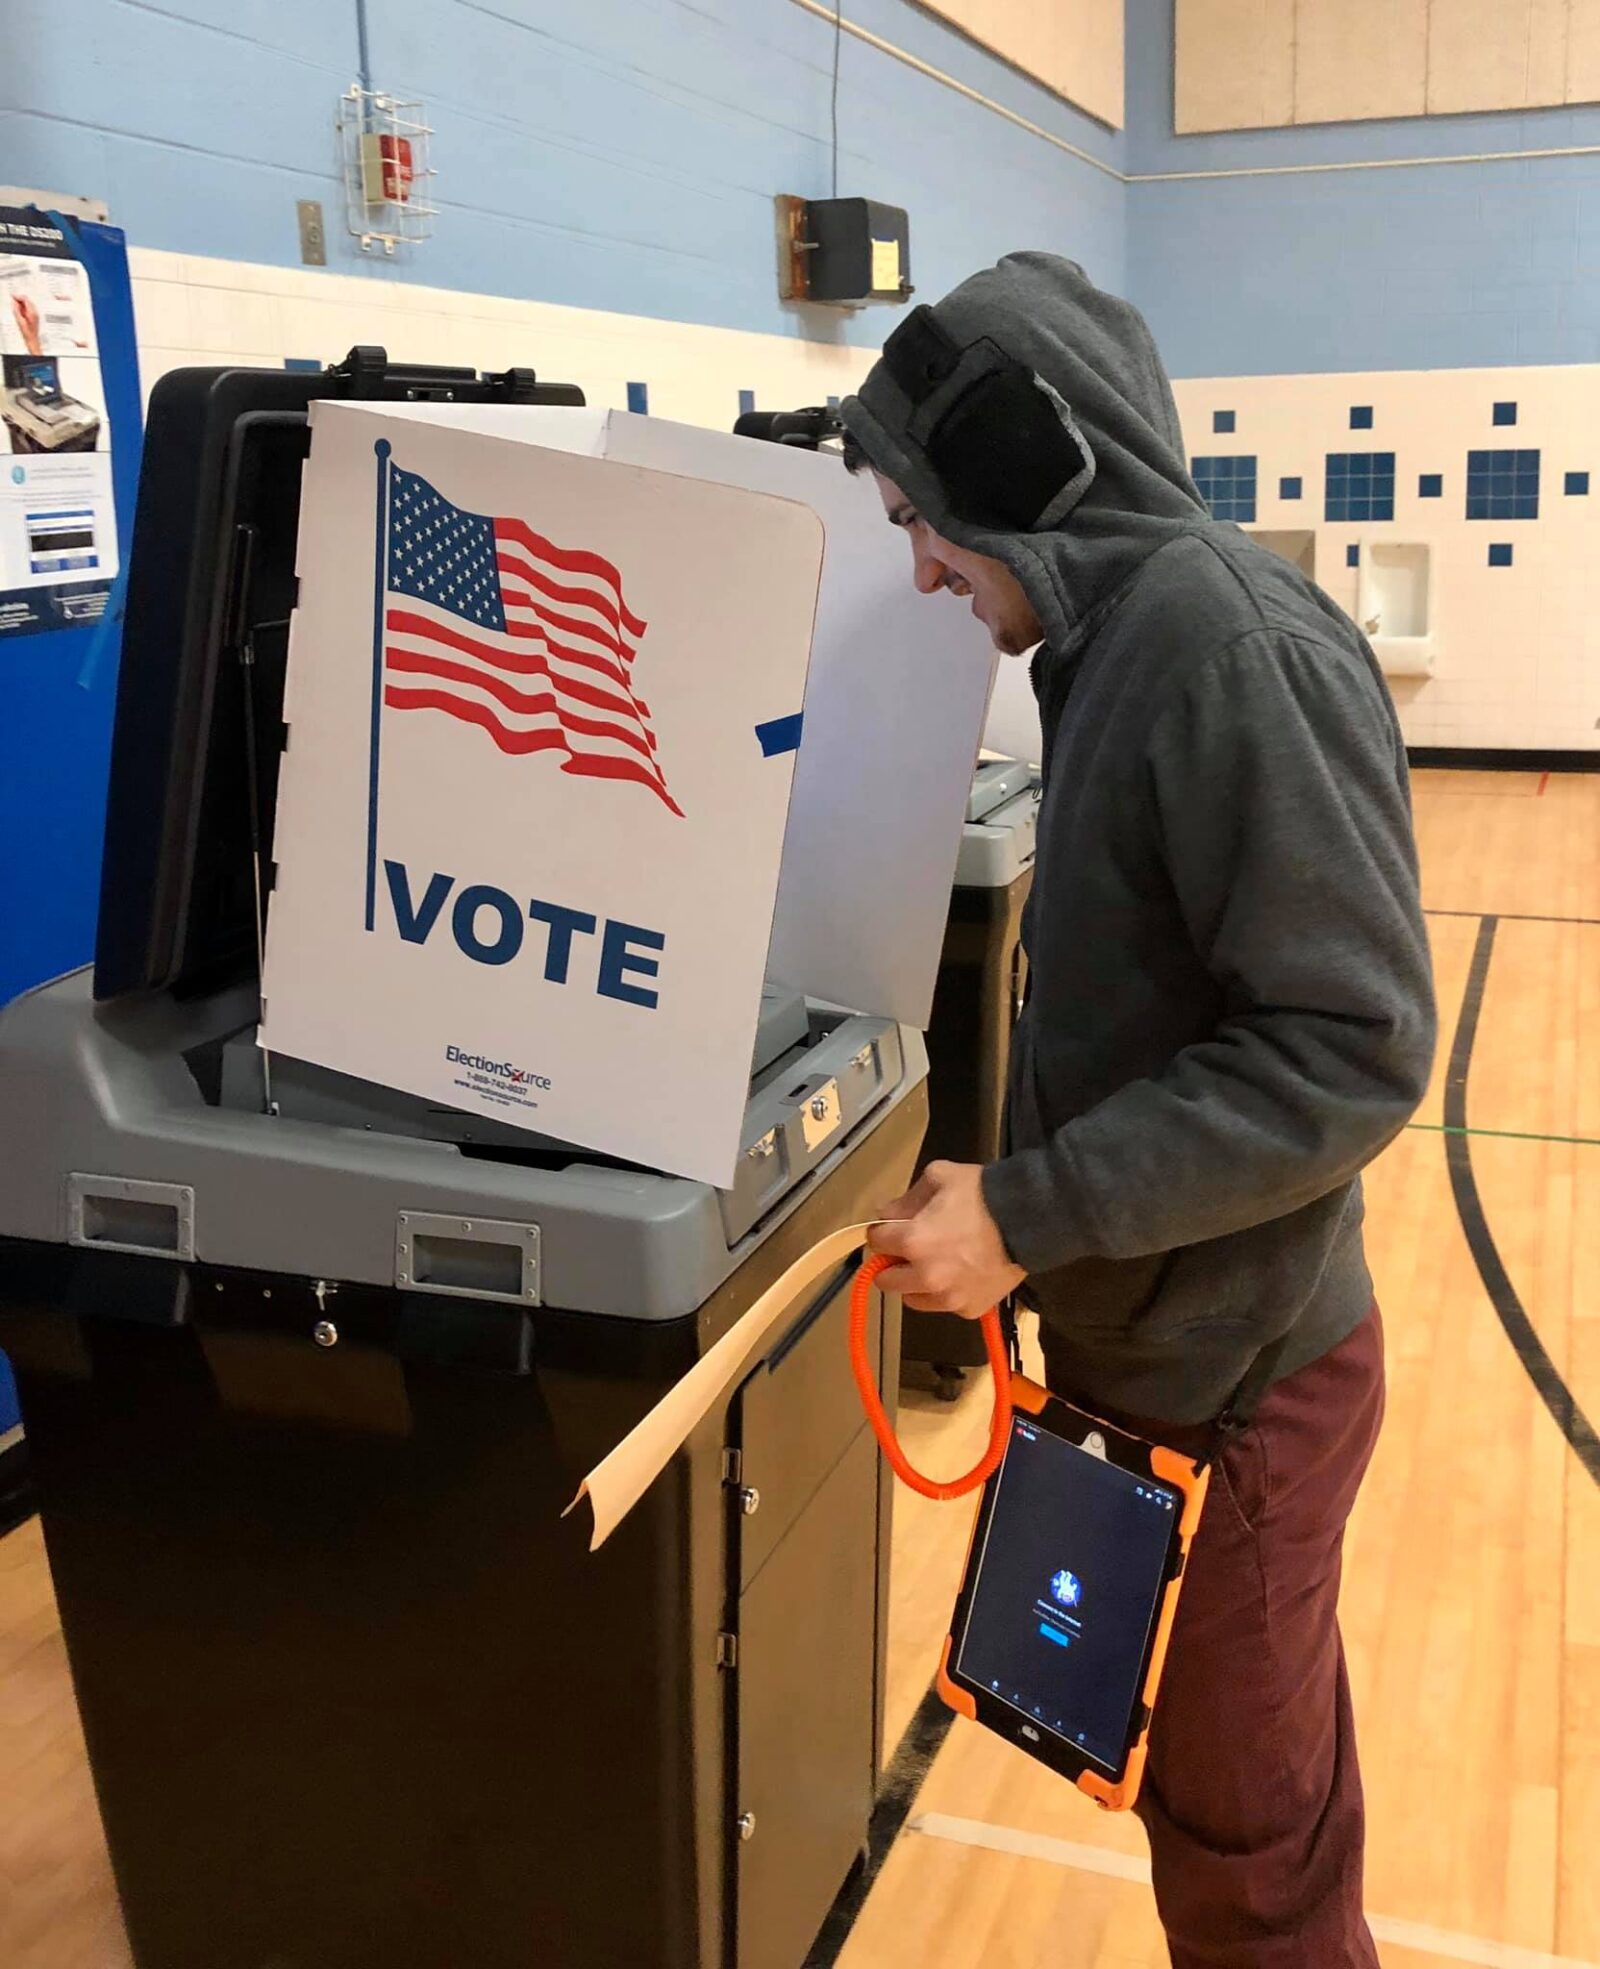 Ben Breaux, a white man wearing a hoodie and holding an AAC device, voting at an indoor polling place that appears to be a gym. A sign that says "Vote" with an American flag is obscuring the booth where he is standing and filling out his ballot.